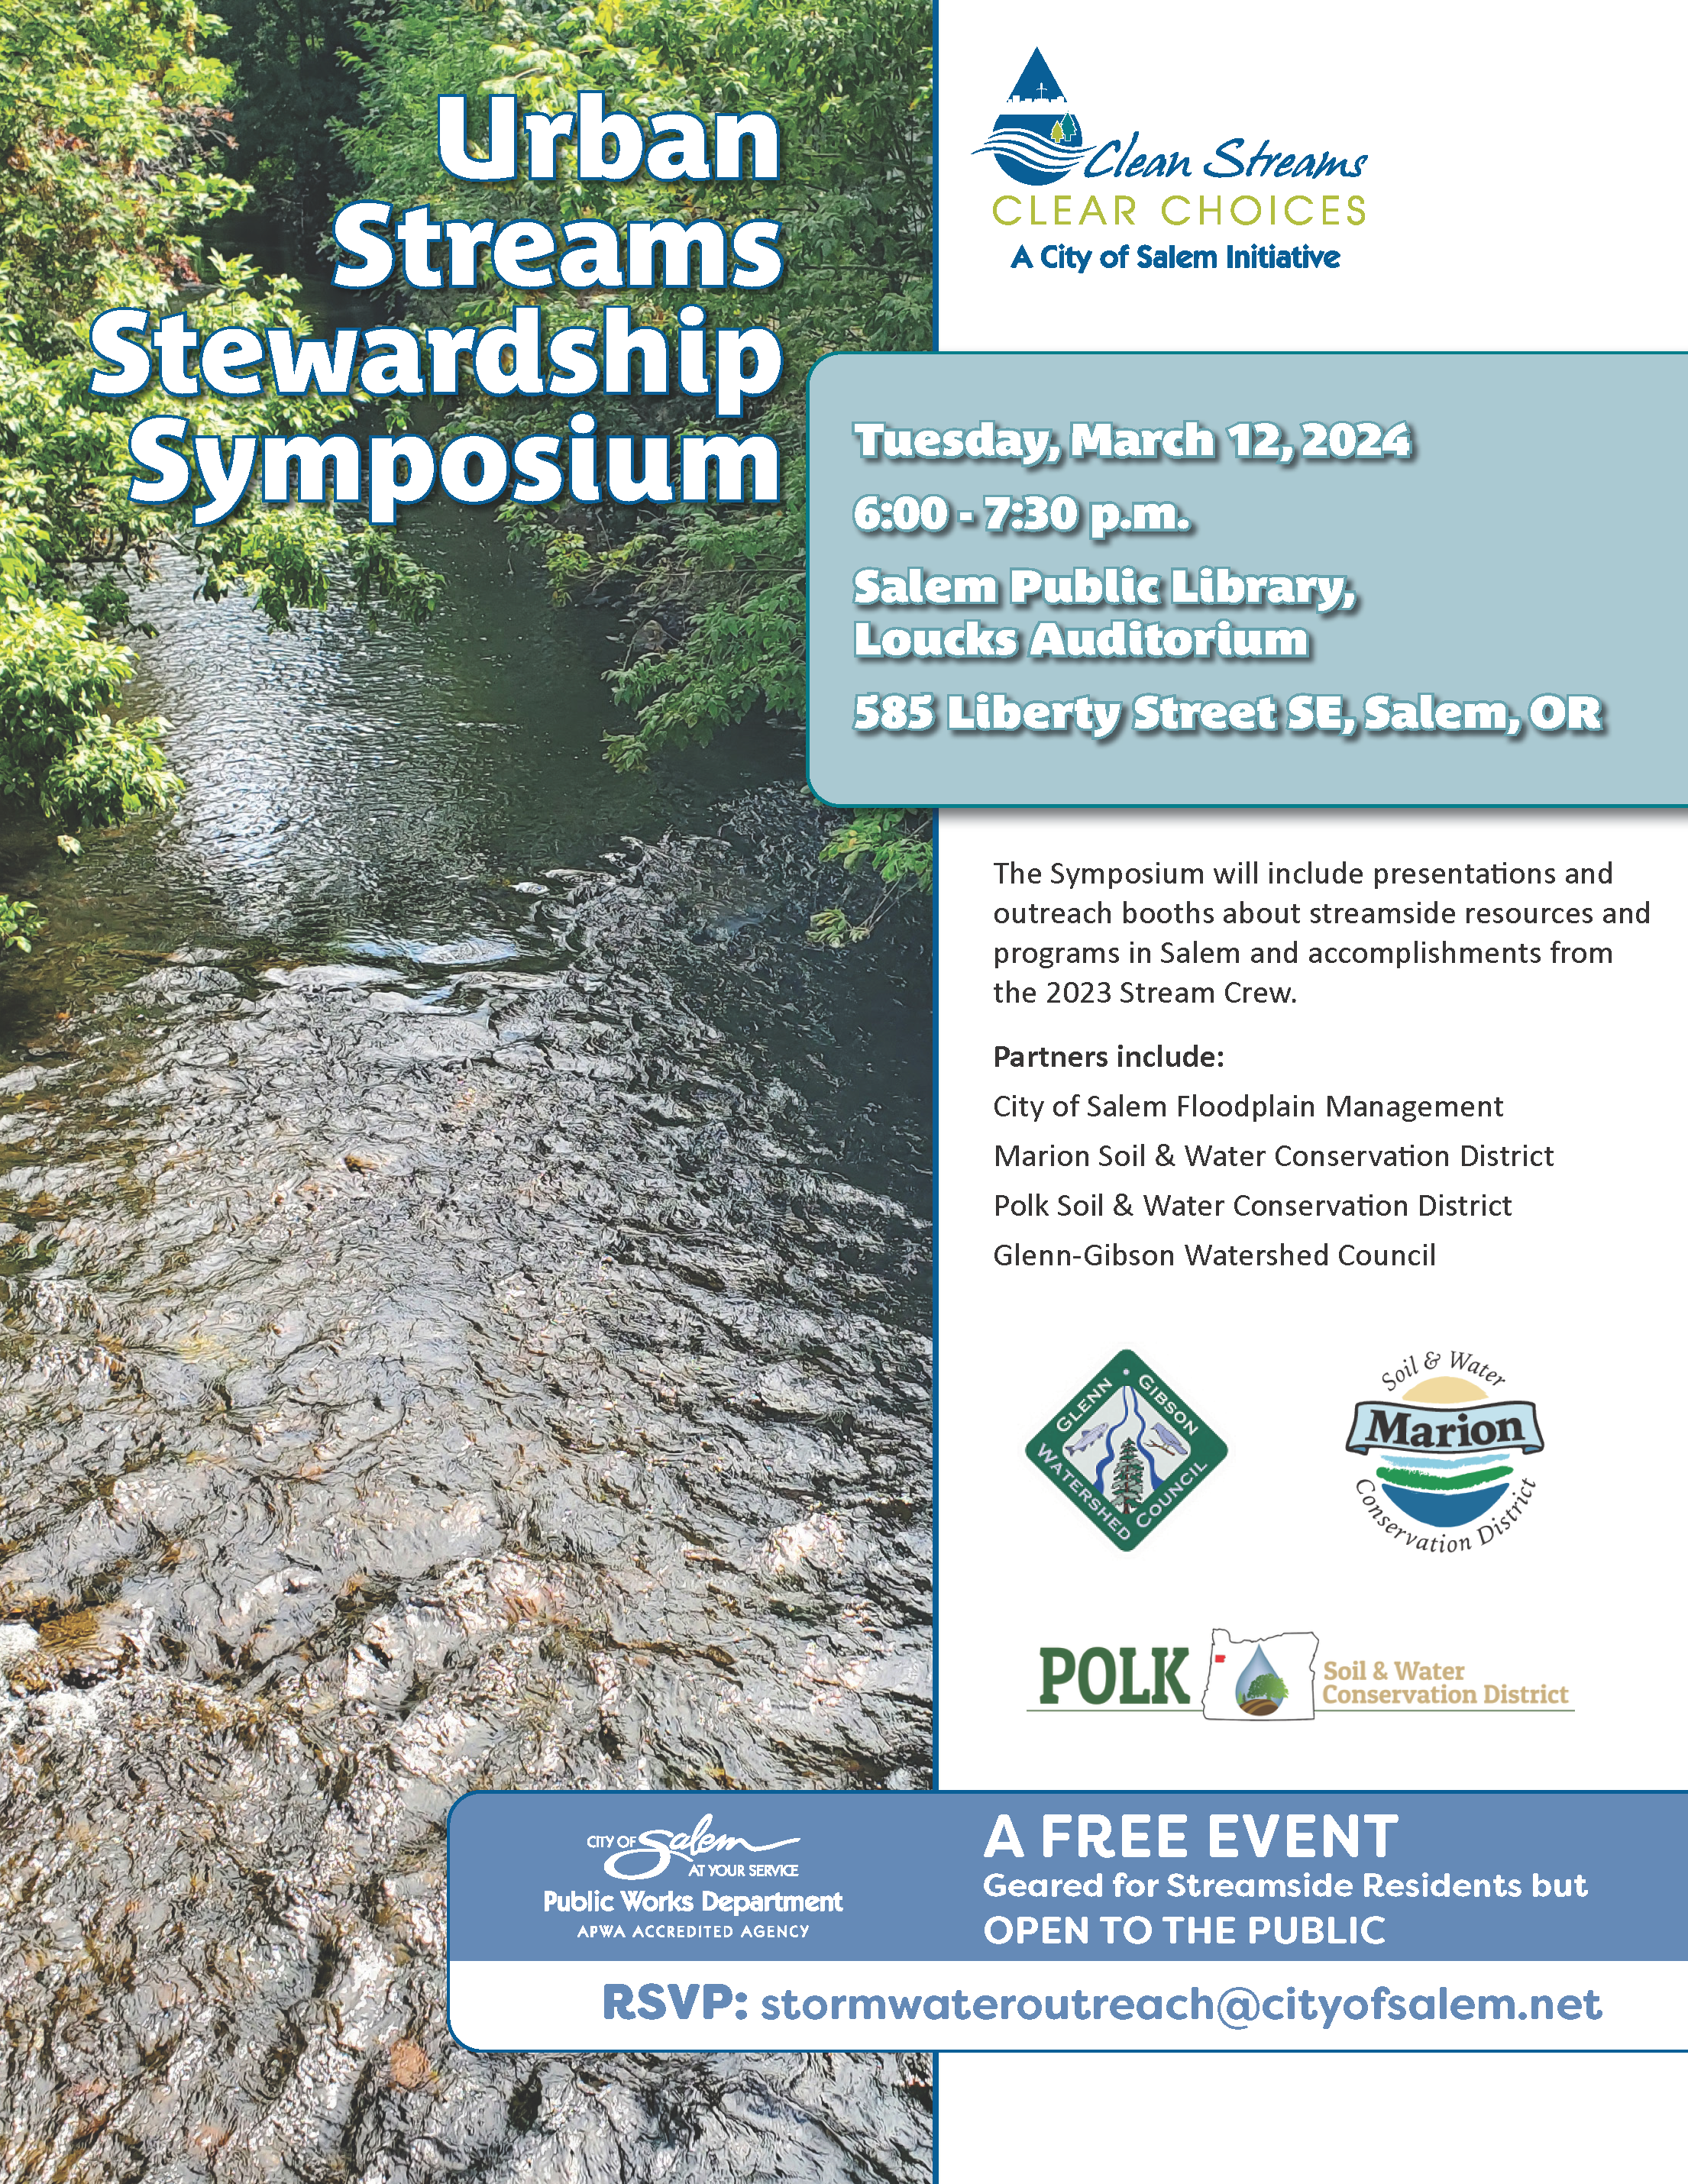 A flyer for the Urban Streams Stewardship Symposium with an image looking down on a stream from a bridge with leafed out trees overhanging the banks and the event description for March 12 2024 from 6-7:30 pm at the Salem public library.